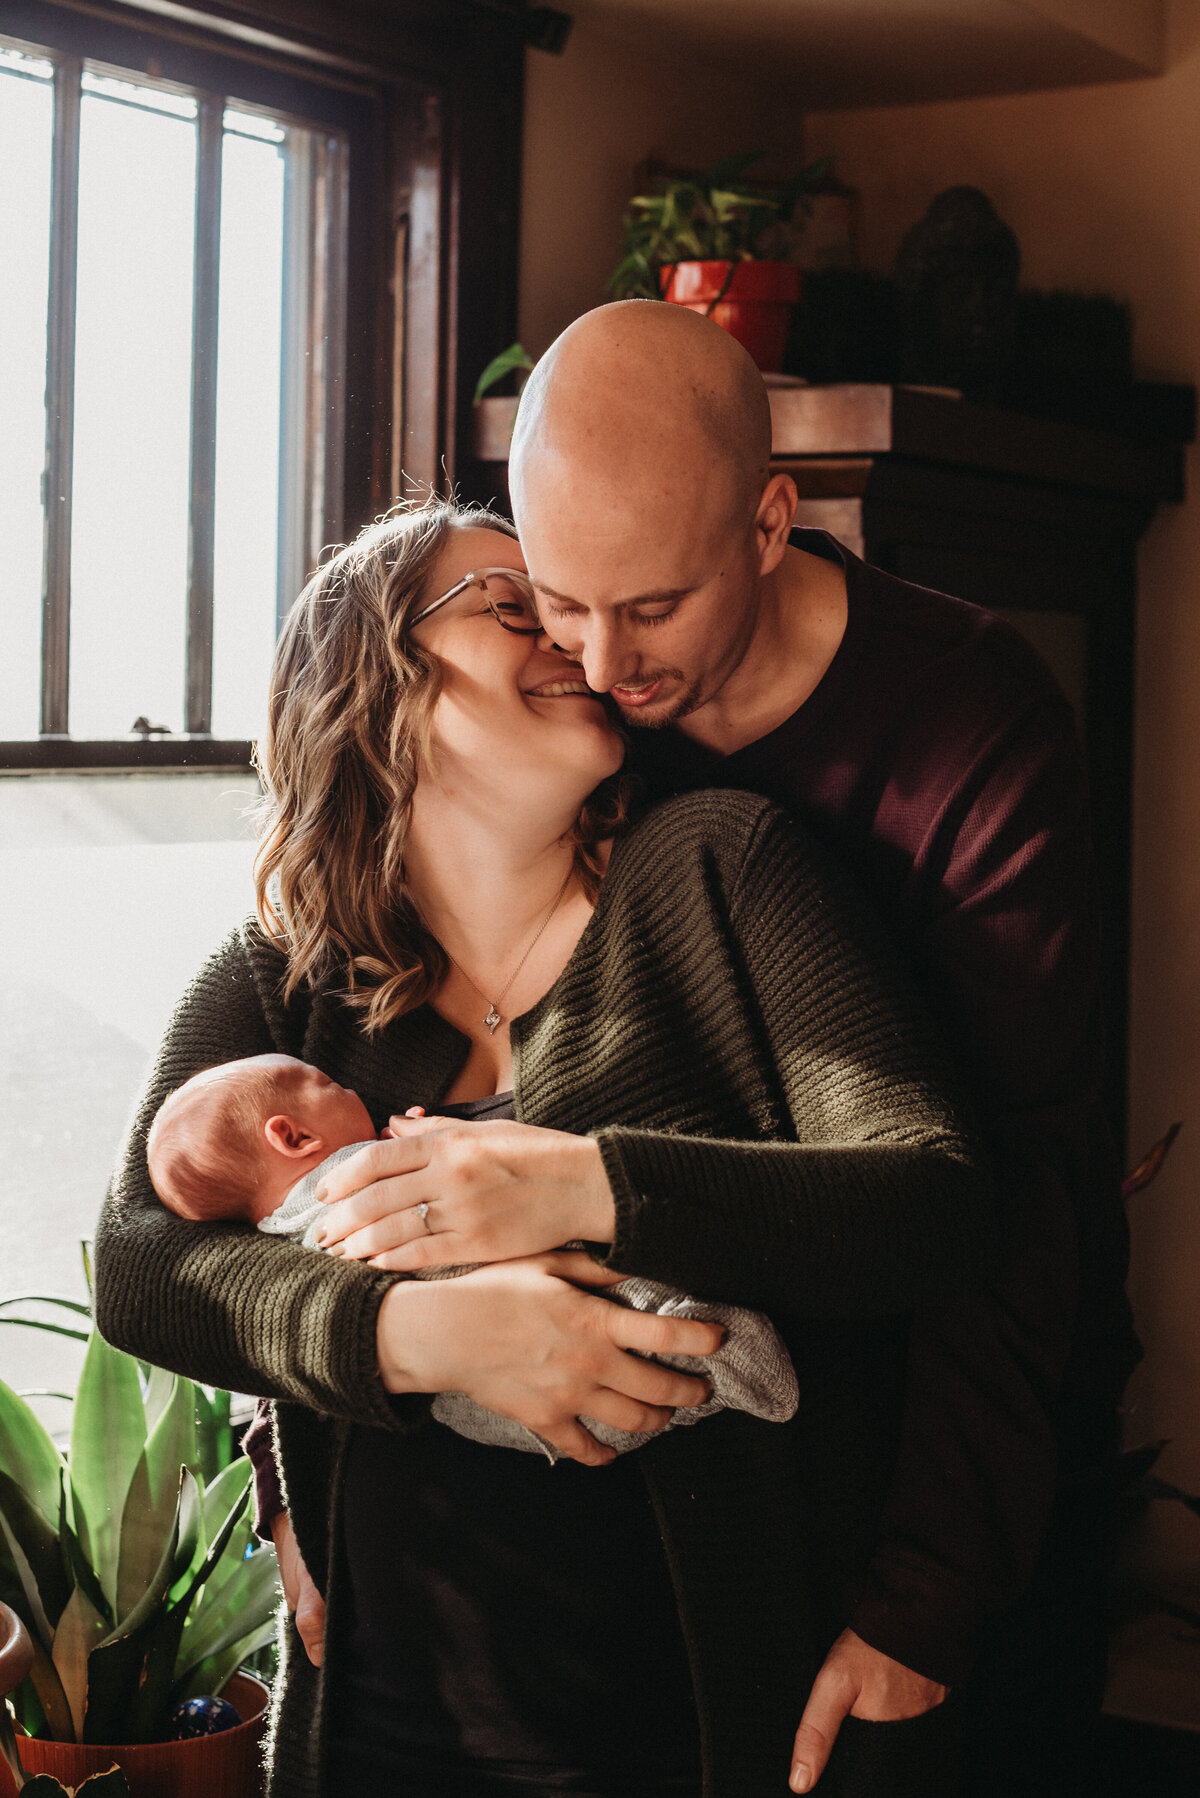 New parents share embrace with newborn in their home.